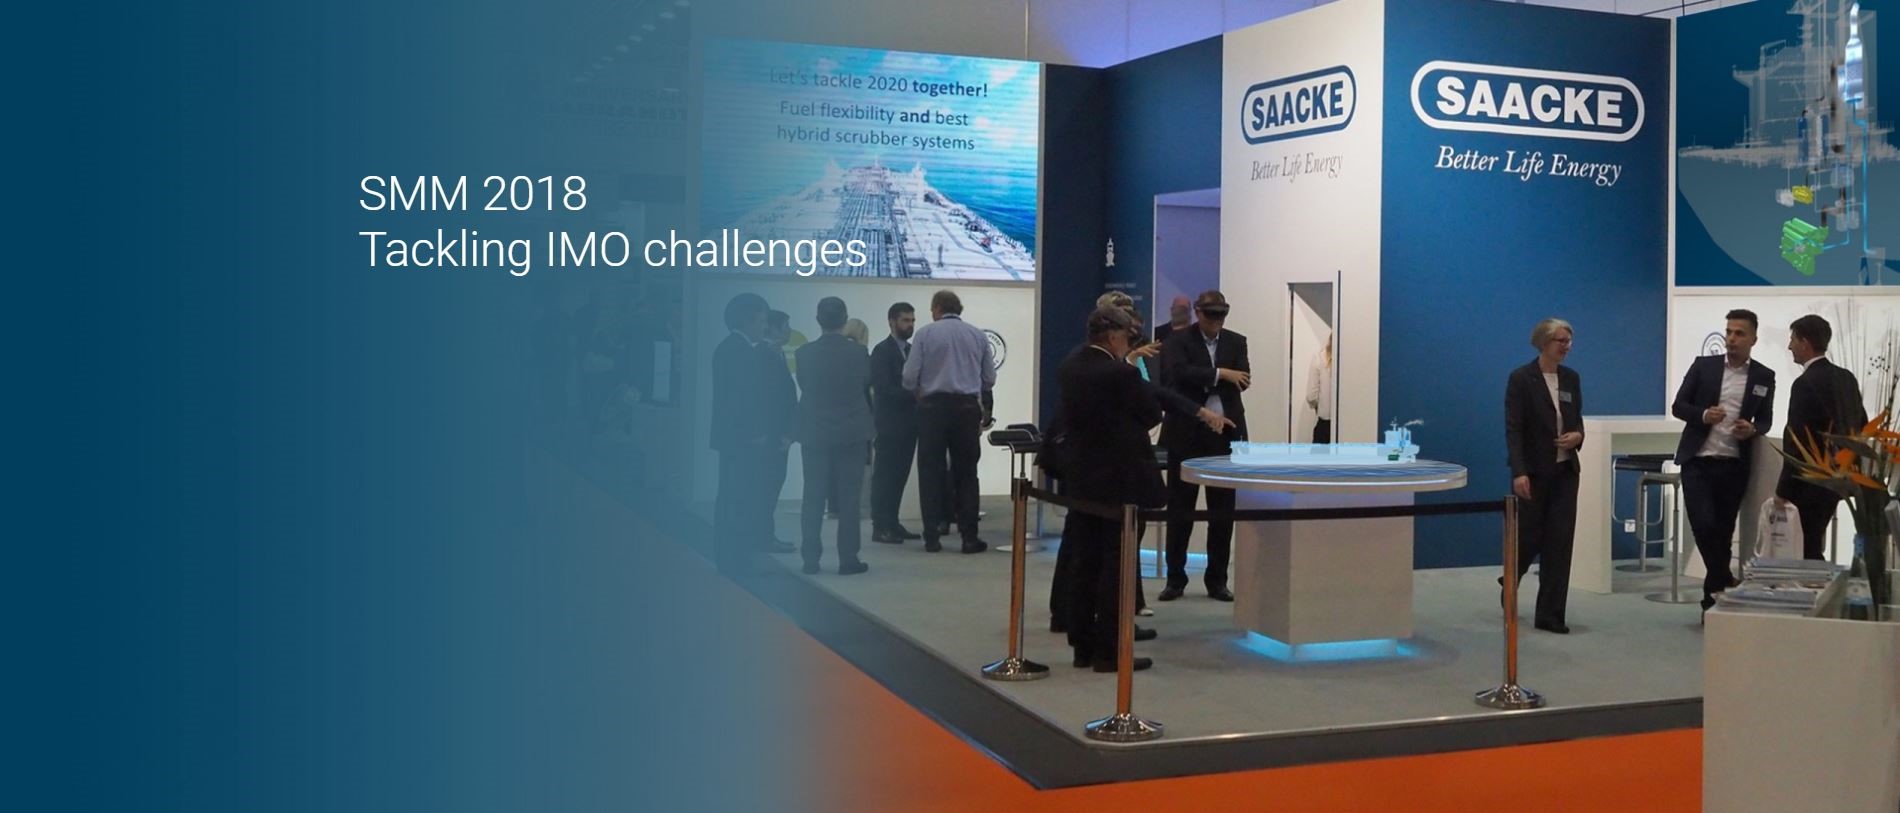 SMM 2018 Tackling IMO challenges